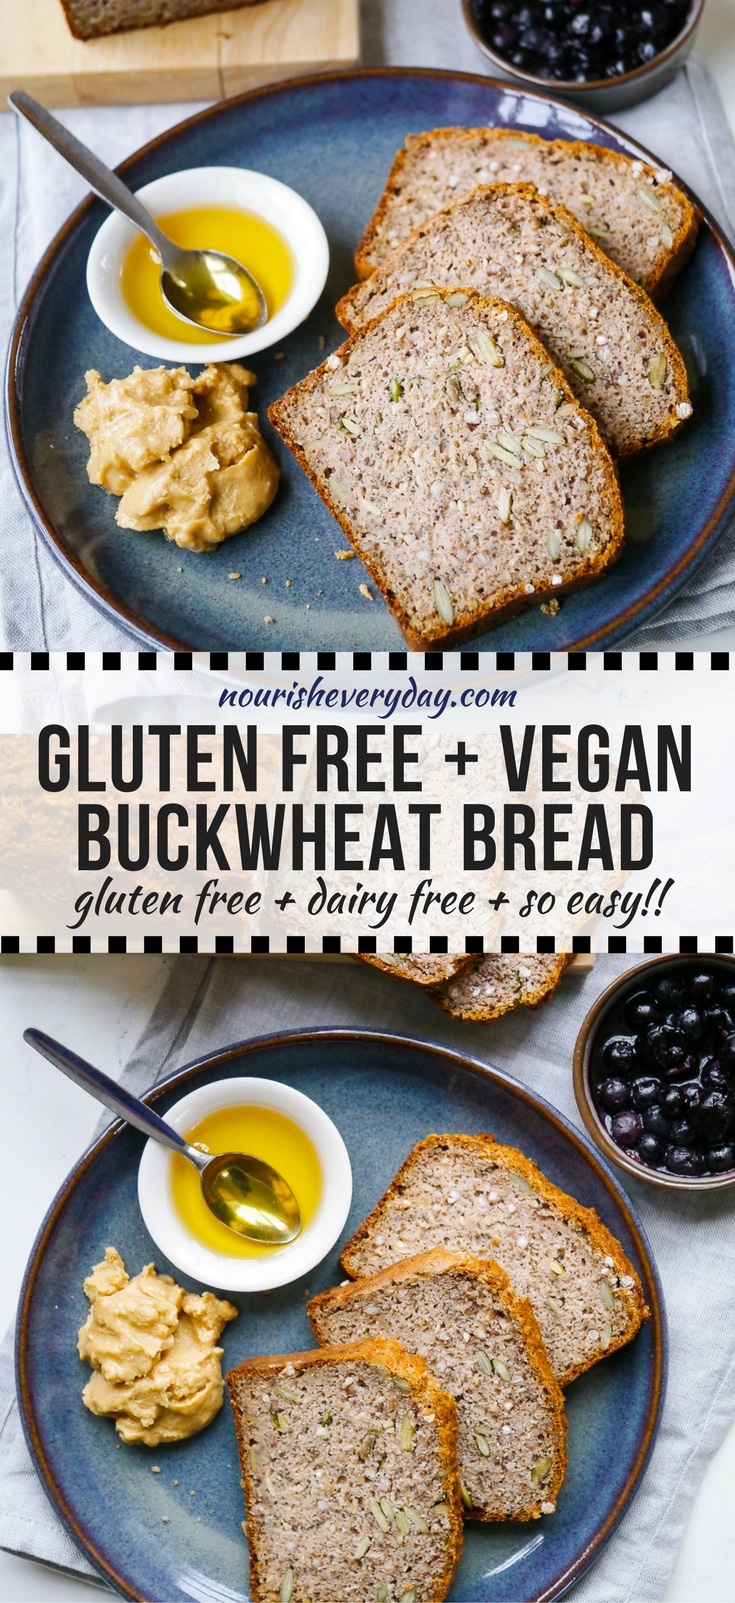 A healthy, and very easy recipe for a vegan buckwheat bread made gluten free using chia seeds, buckwheat flour and almond meal.